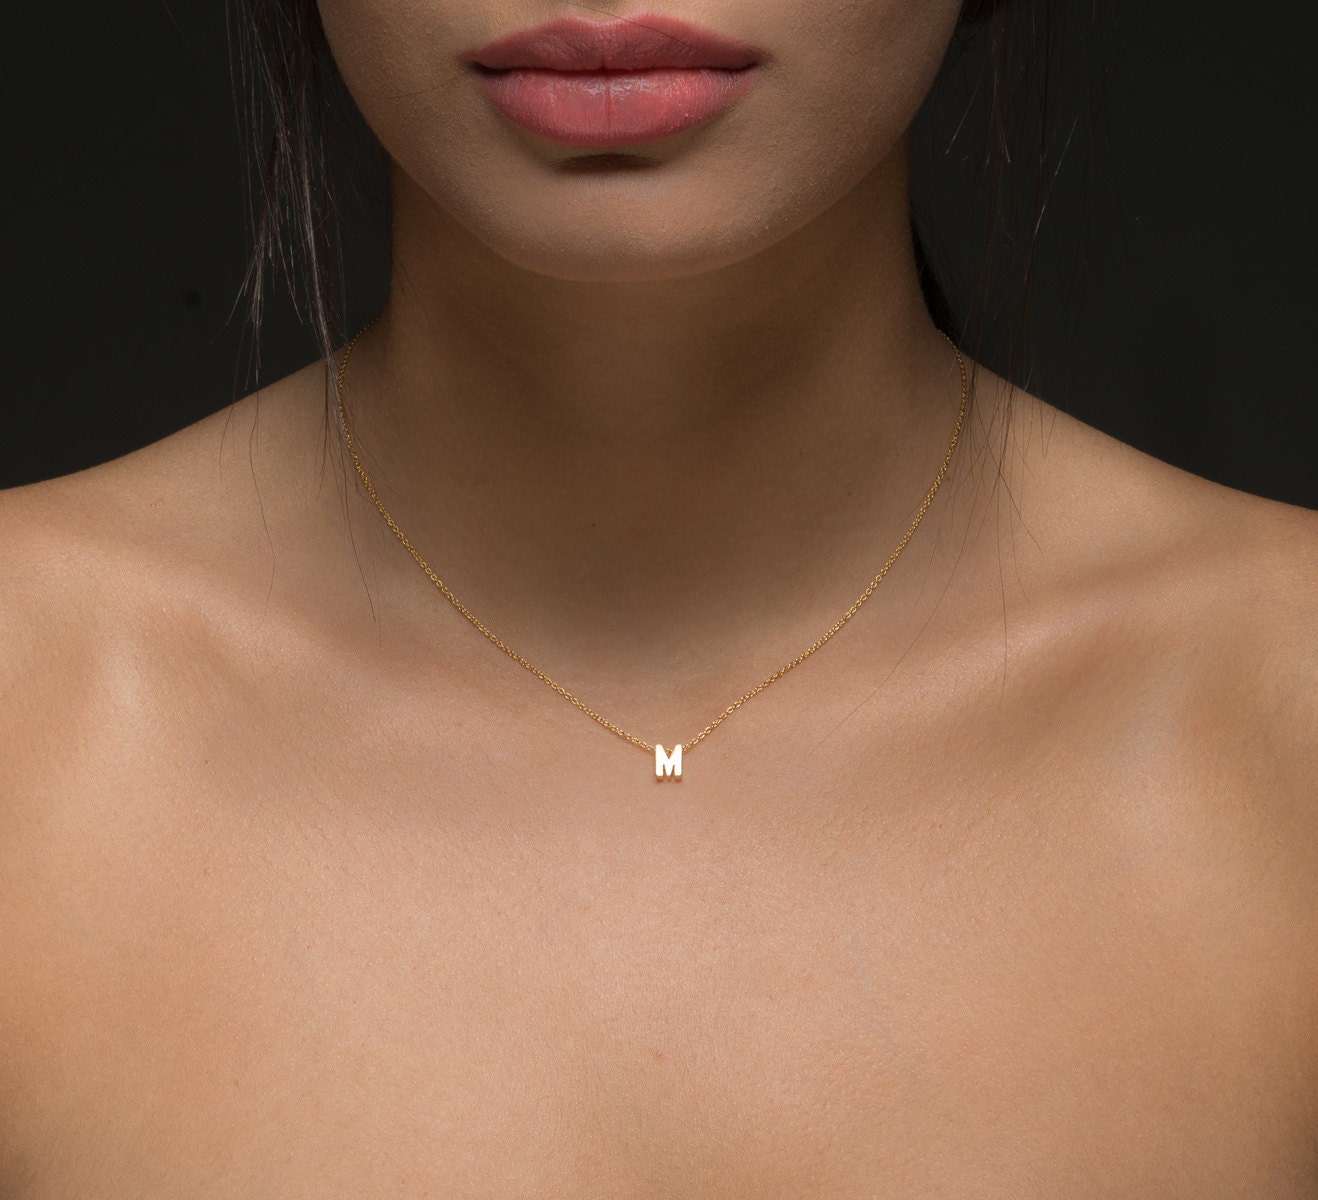 Initial Necklace. Tiny Gold Letter Necklace Gold initial